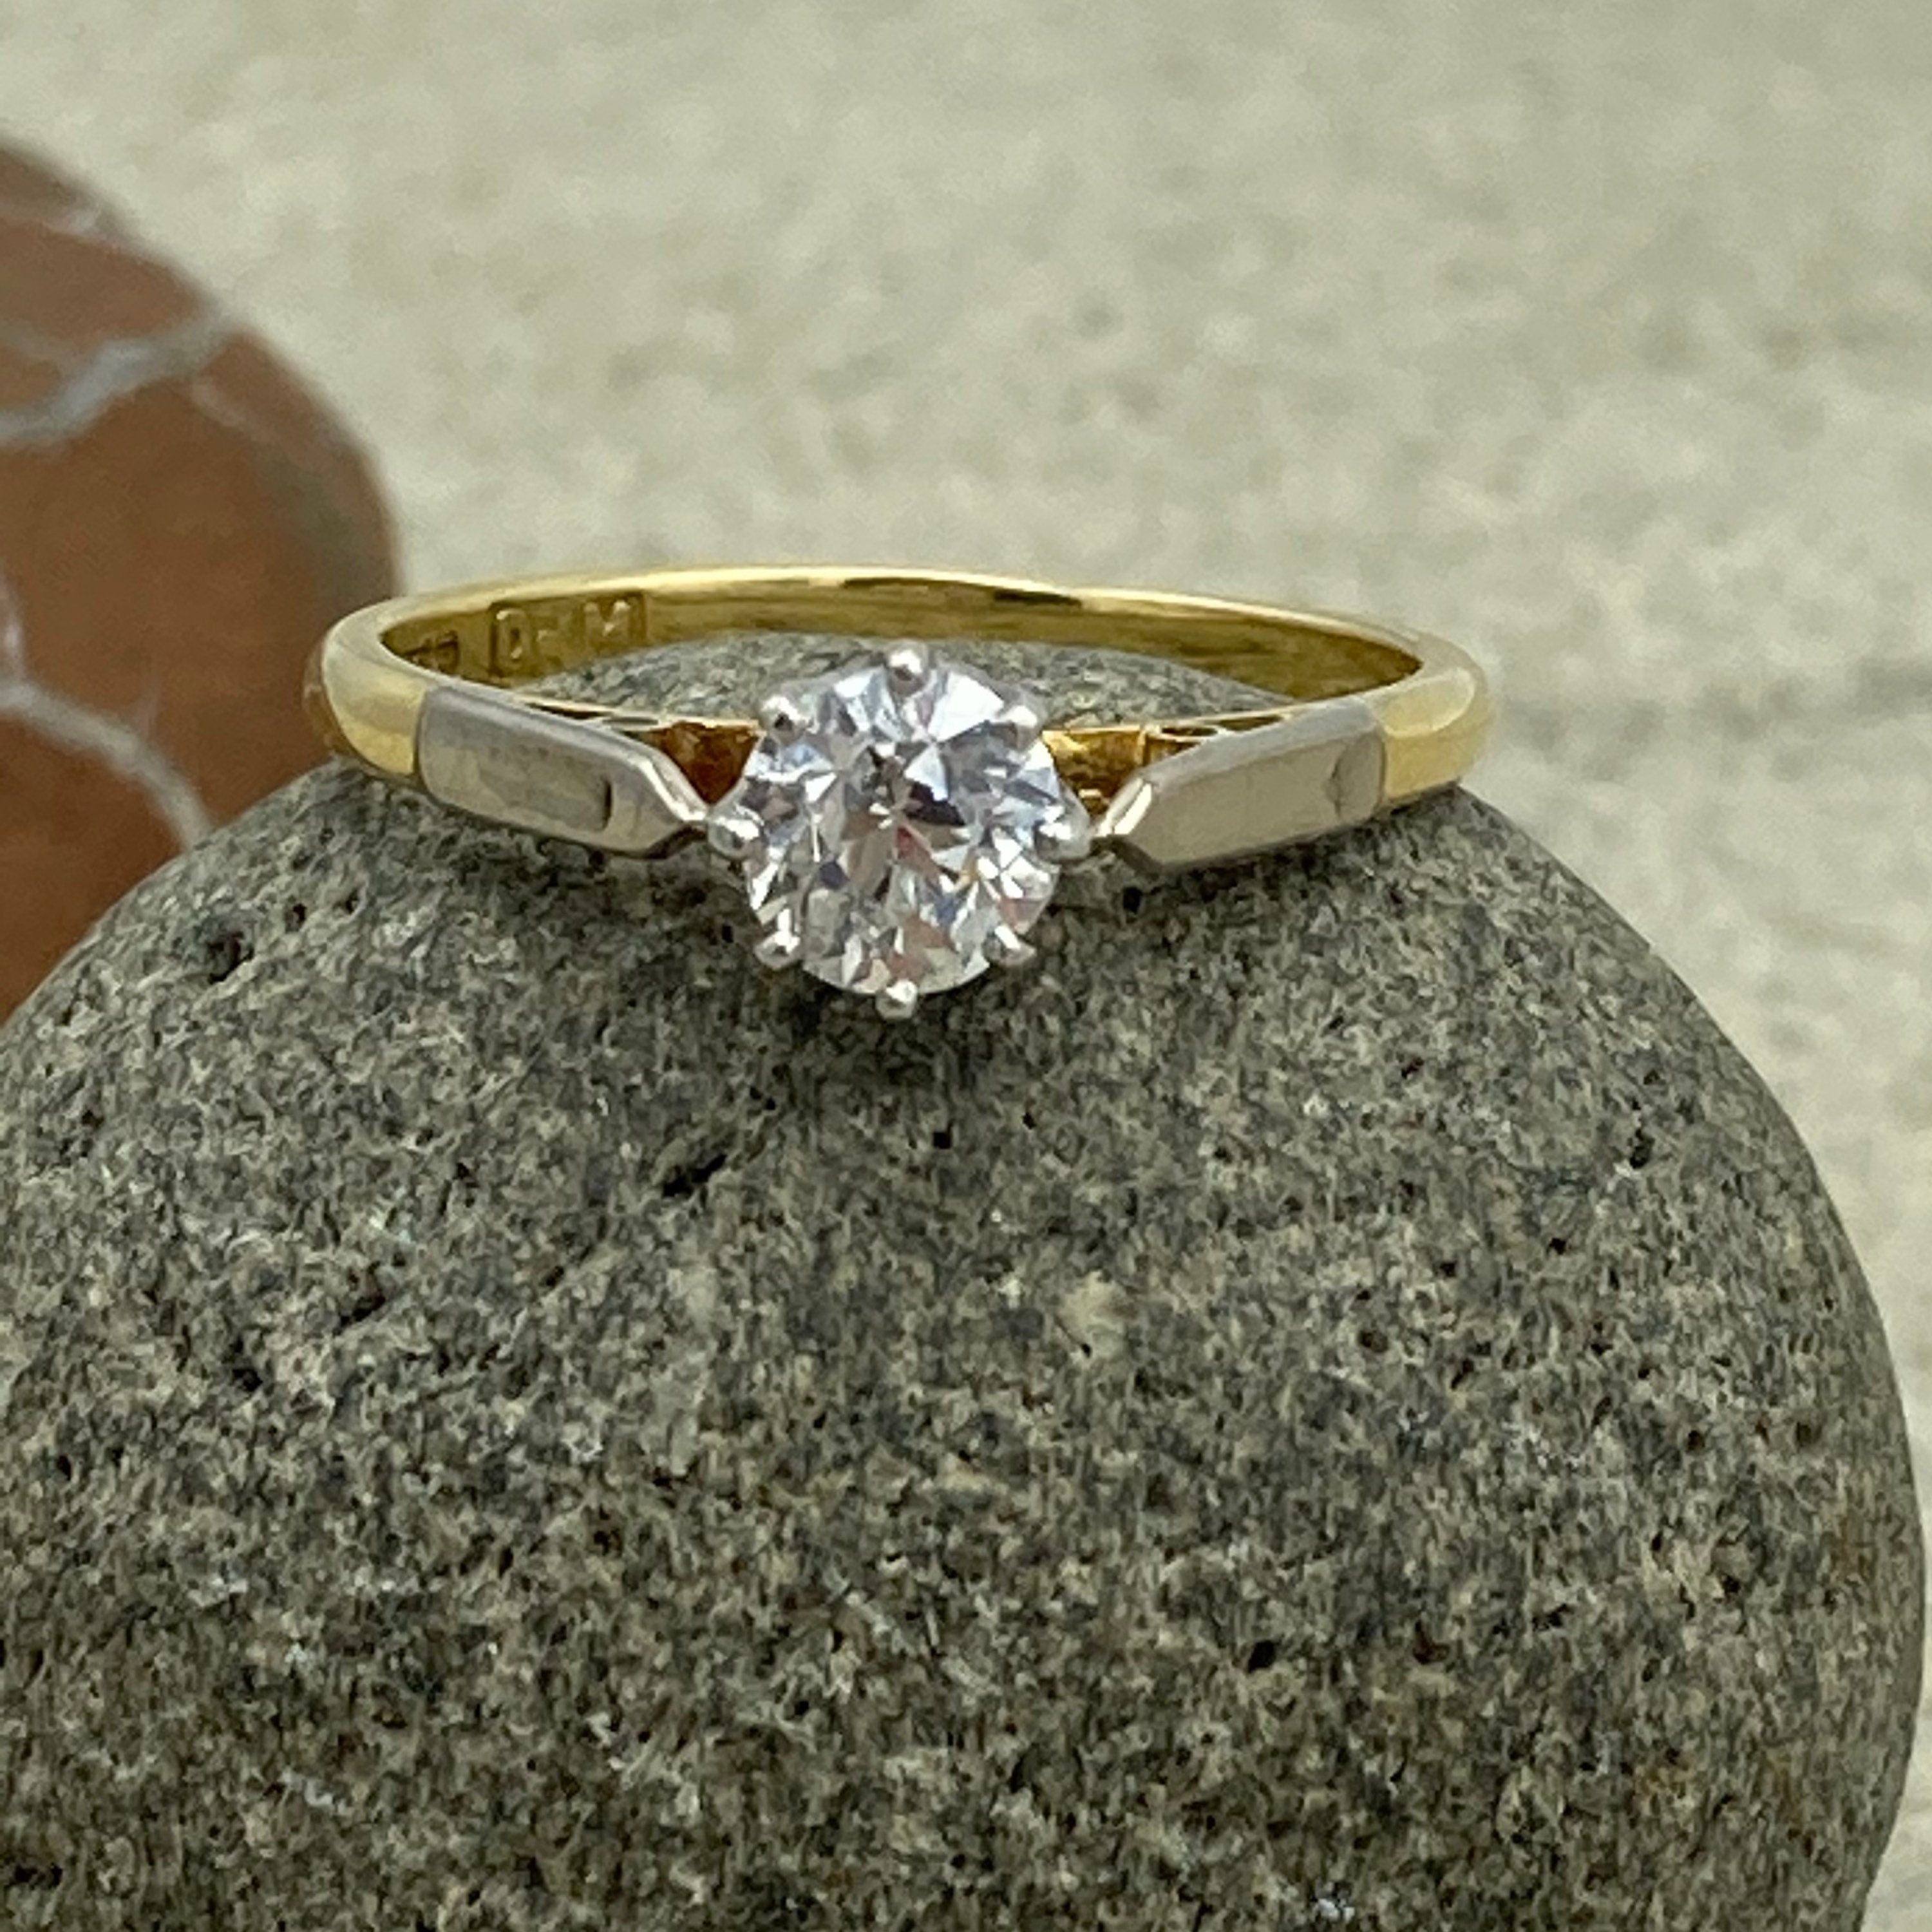 Vintage, 18ct gold, old european cut diamond, solitaire engagement ring